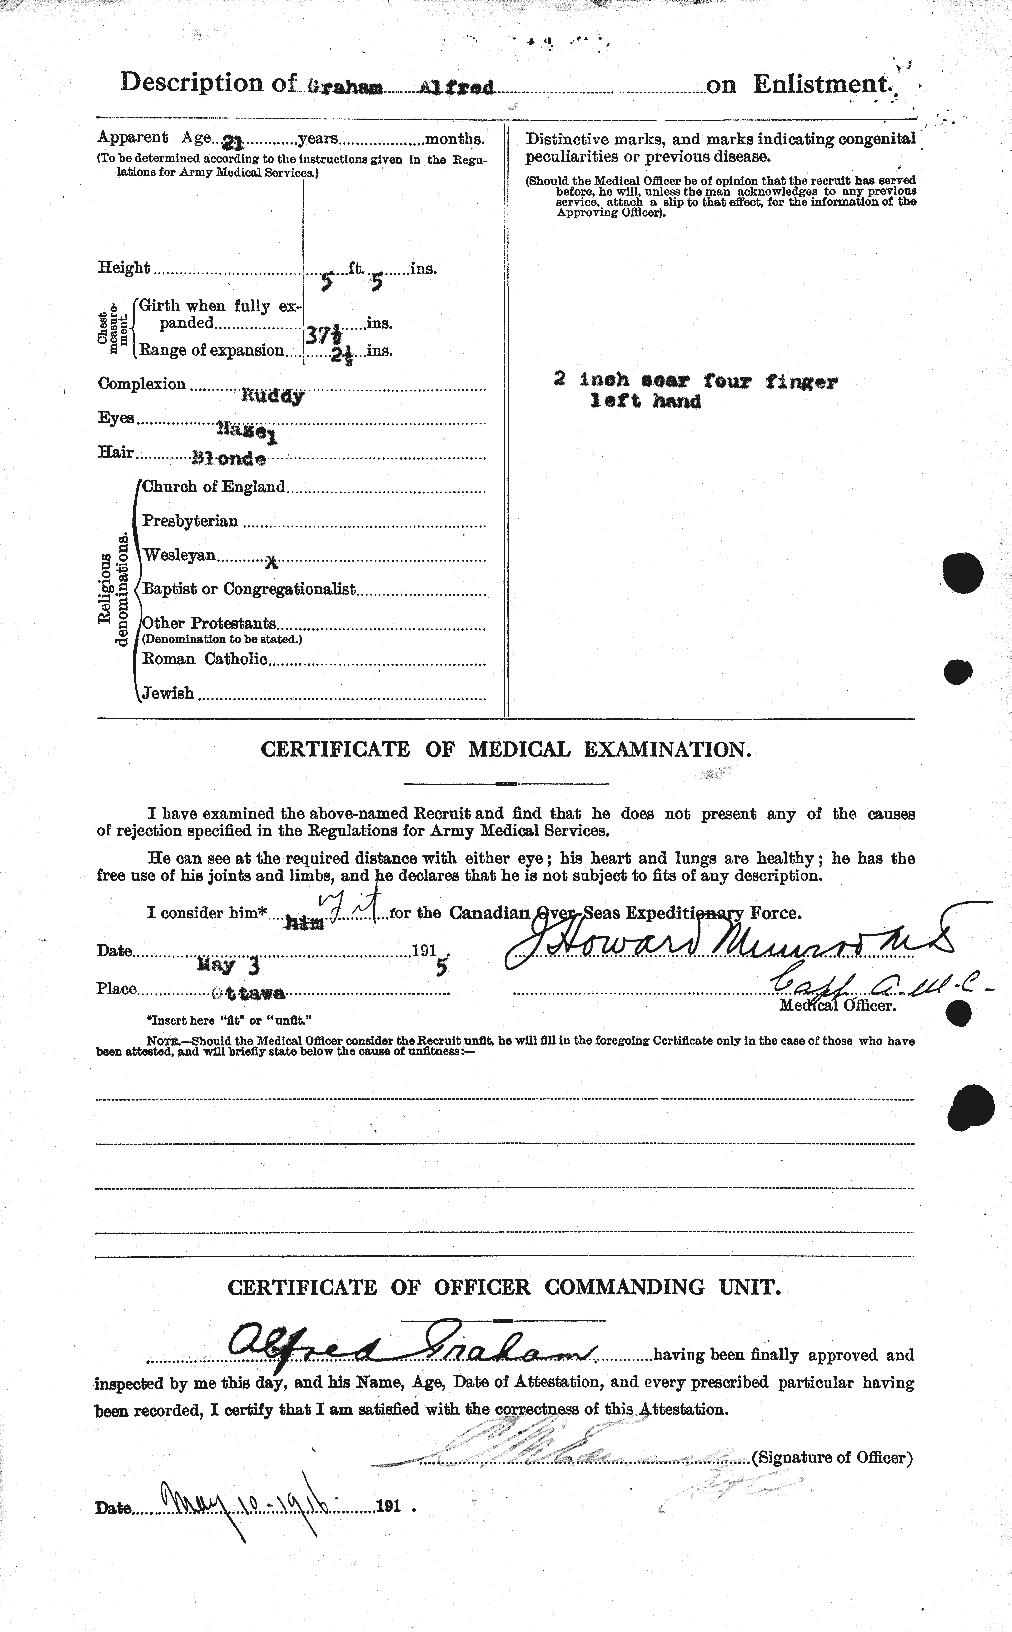 Personnel Records of the First World War - CEF 359595b